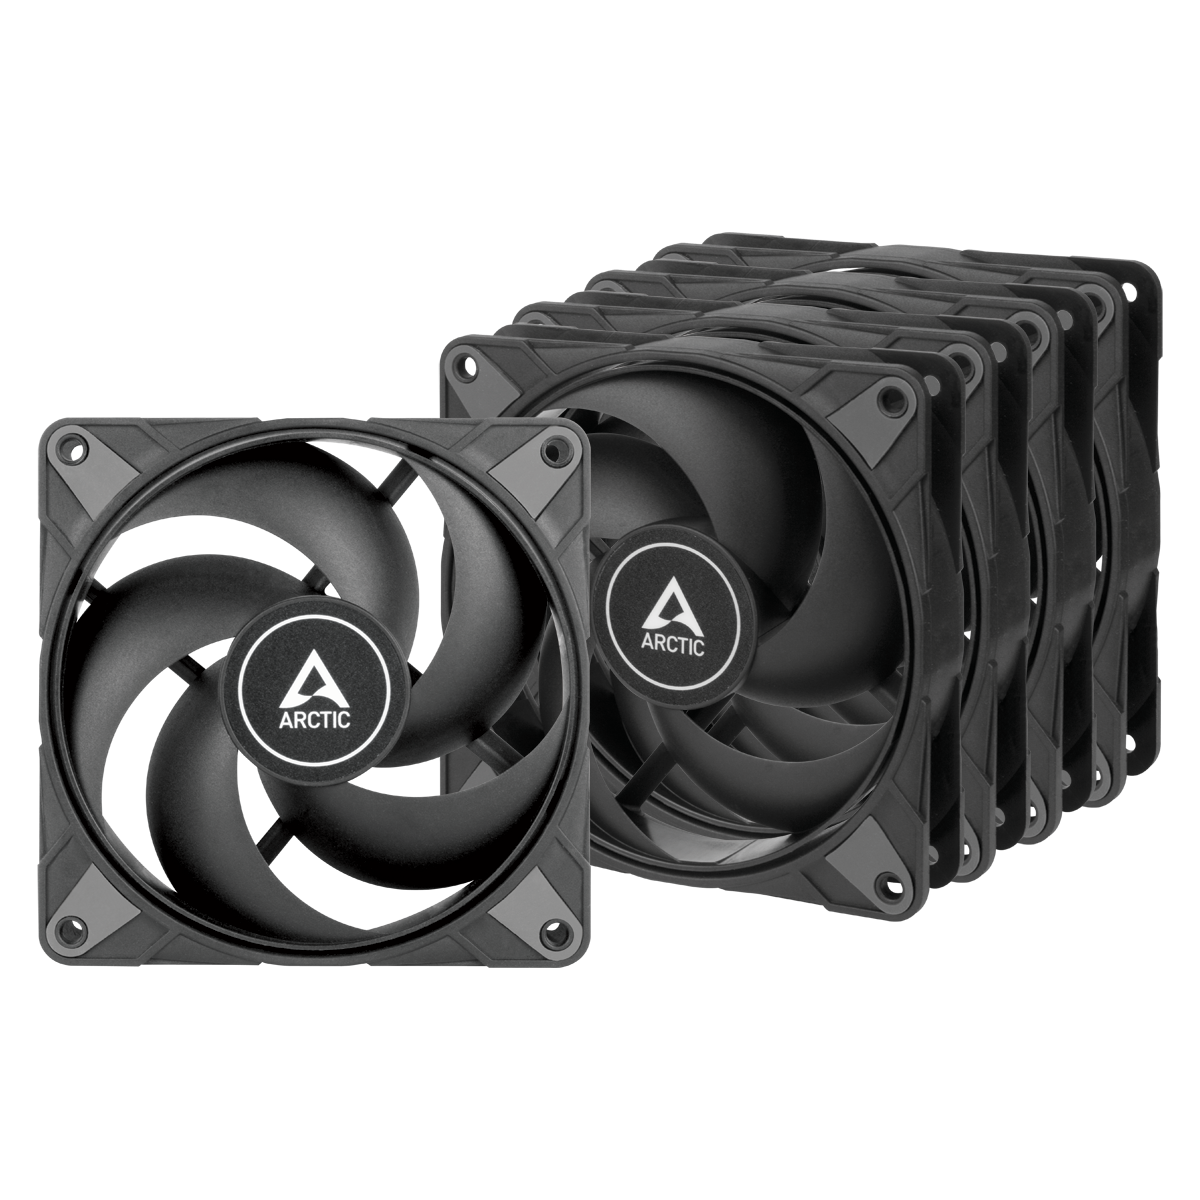 ARCTIC P12 Max - High-Performance 120 mm case Fan, PWM Controlled 200-3300  RPM, optimised for Static Pressure, 0dB Mode, Dual Ball Bearings - Black